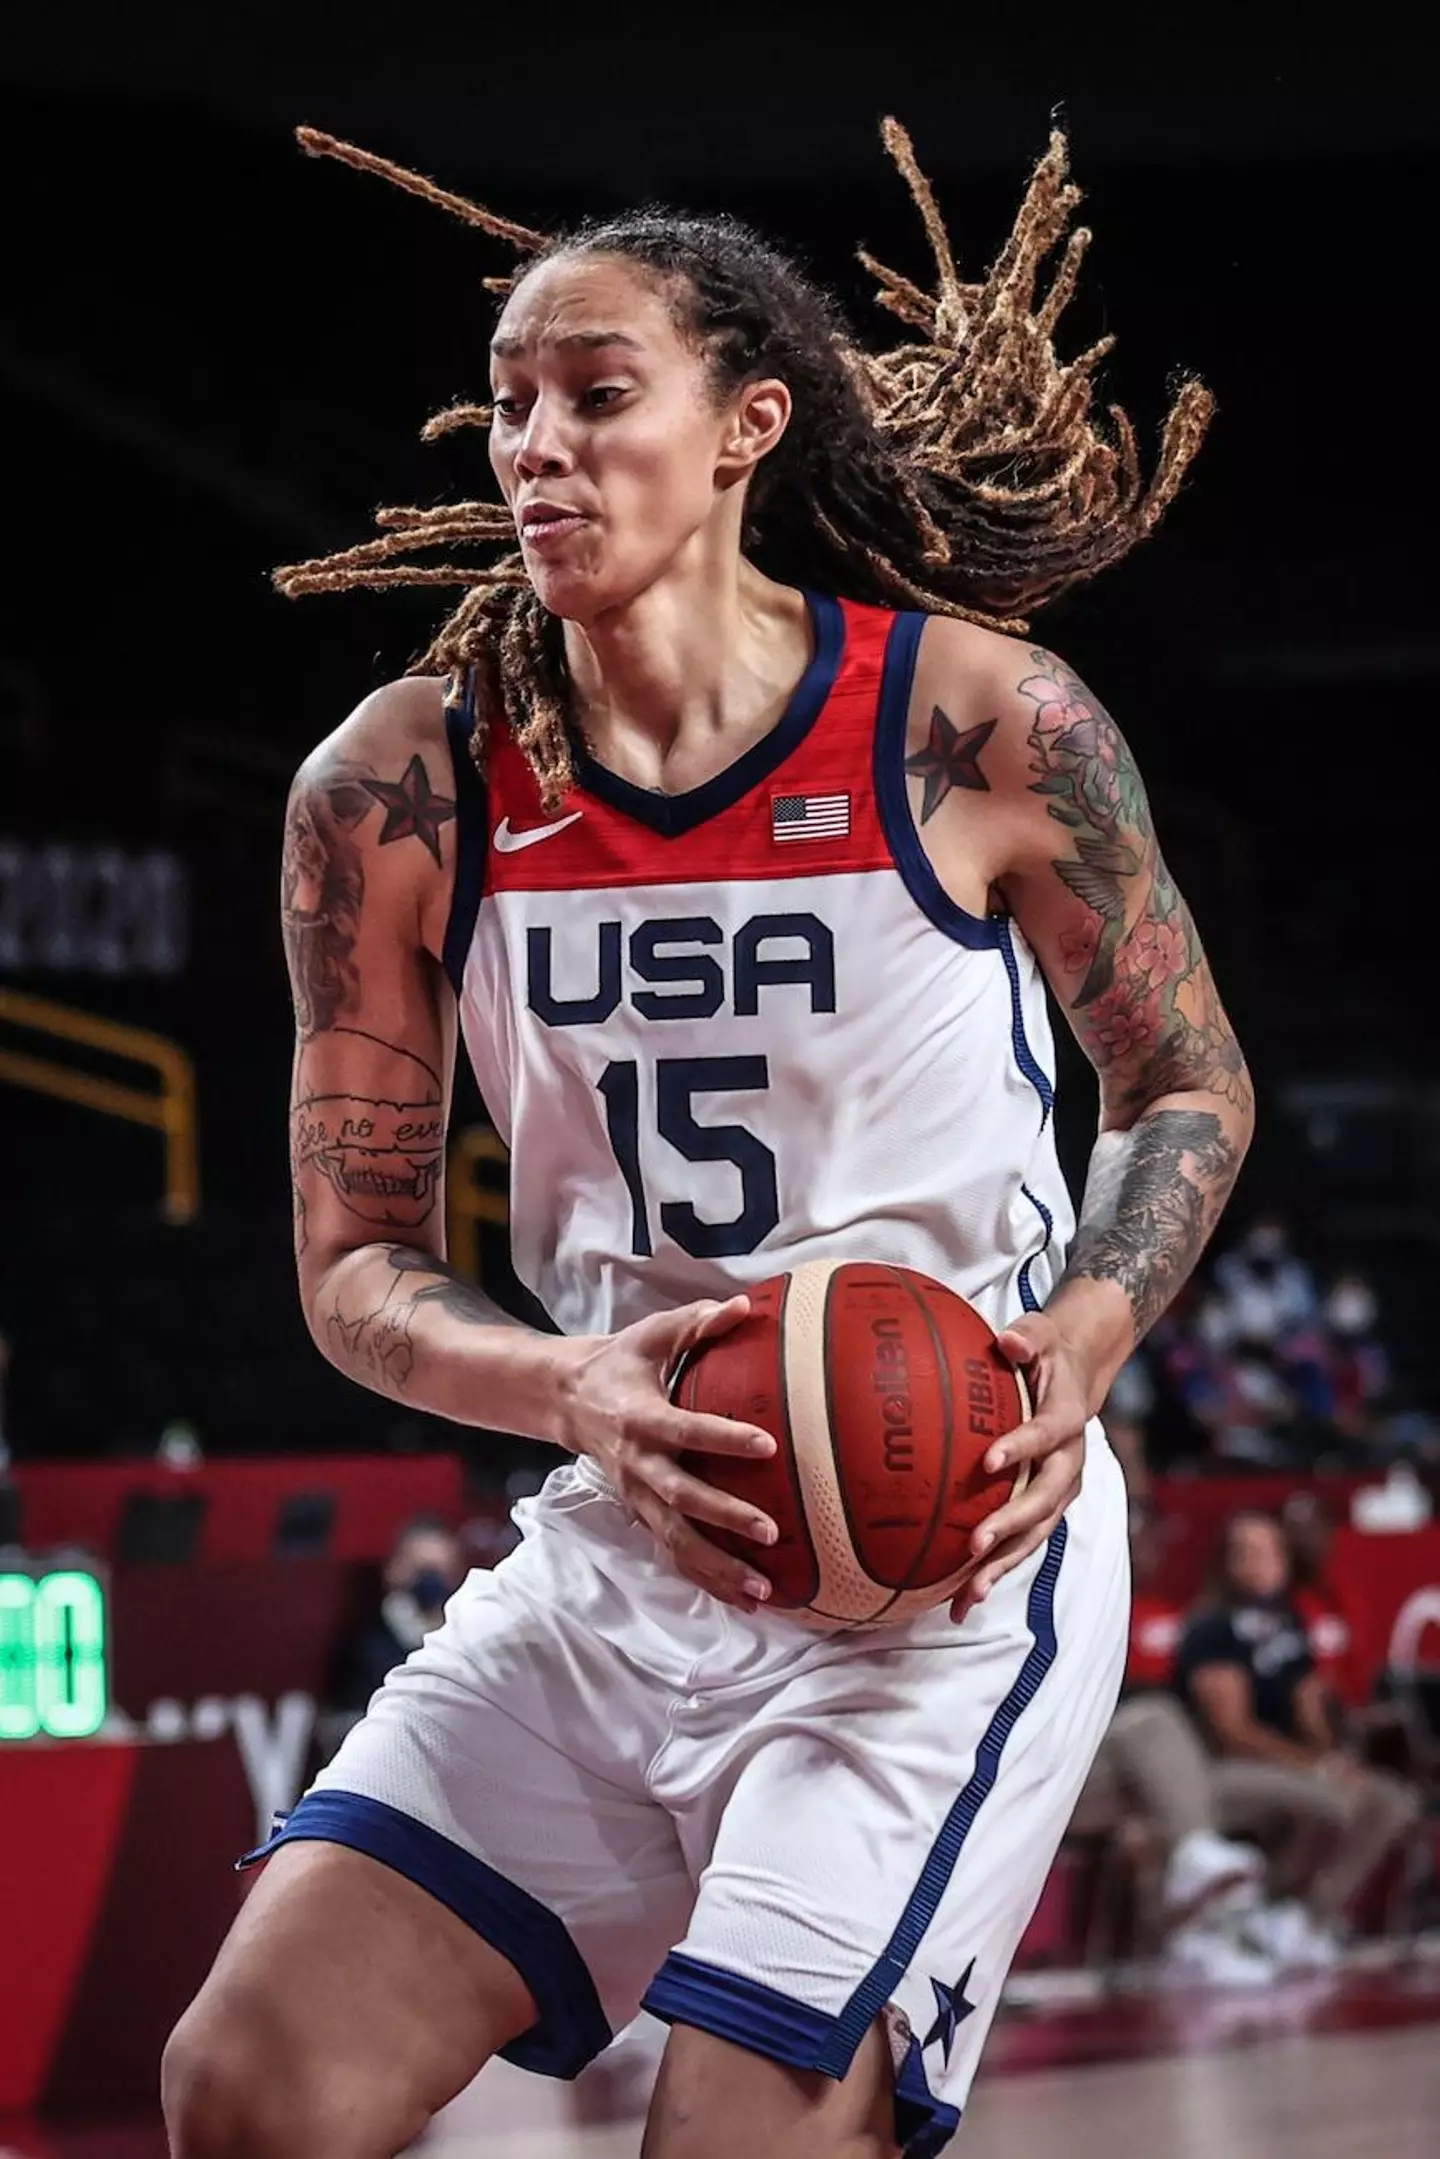 Brittney Griner only had 0.7 grams of THC on her when she was detained.